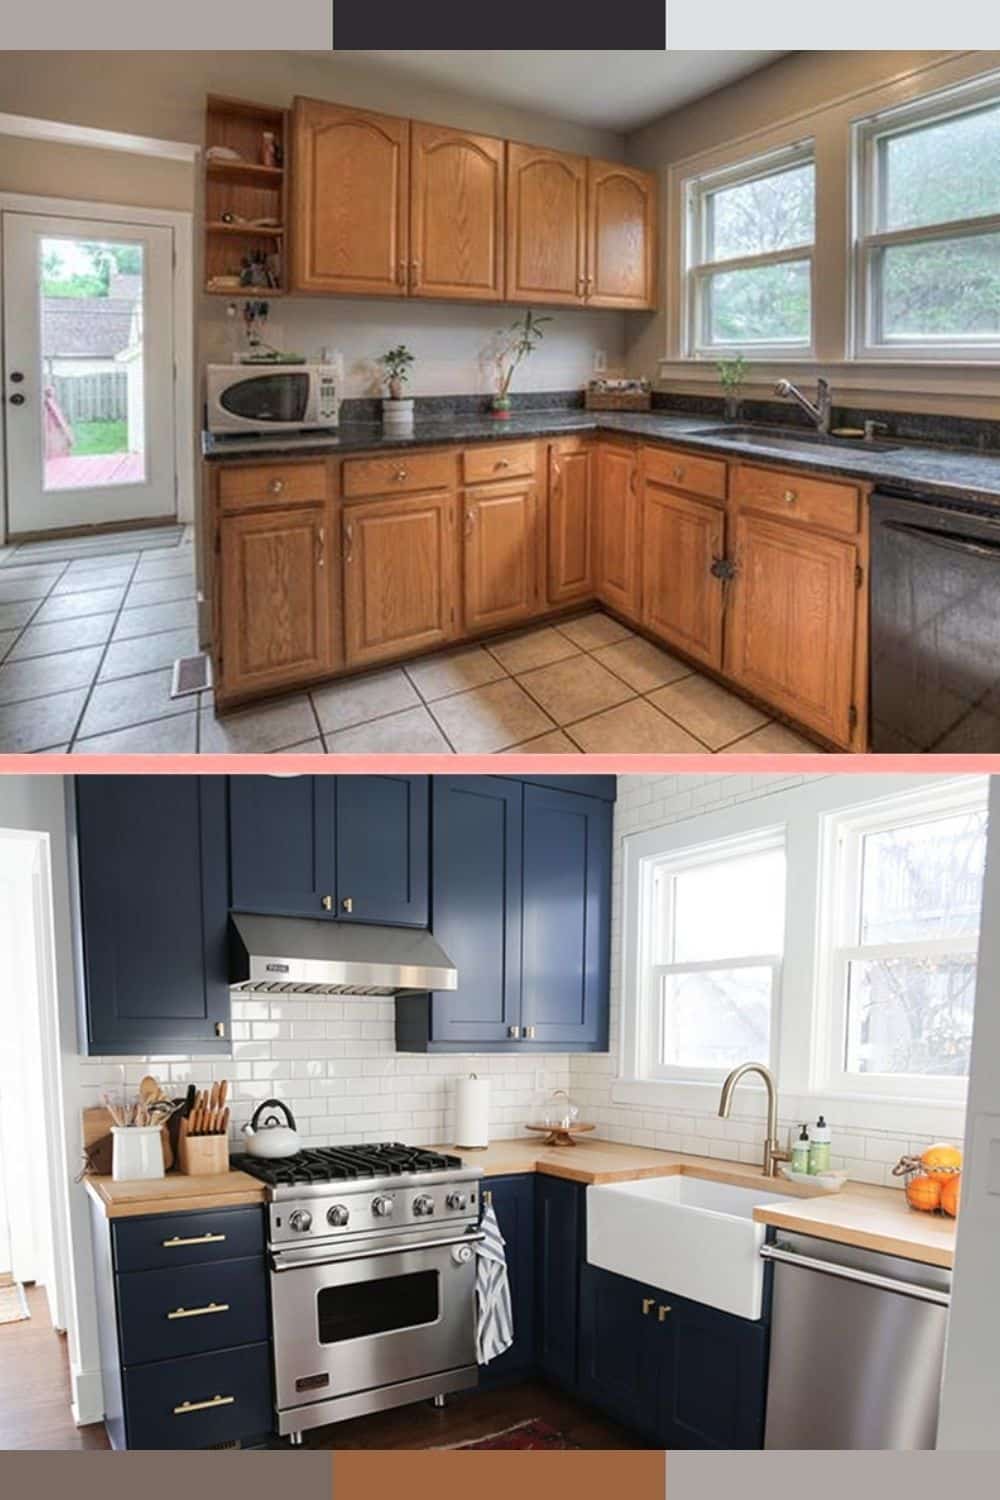 how much does it cost to remodel a kitchen in a condo